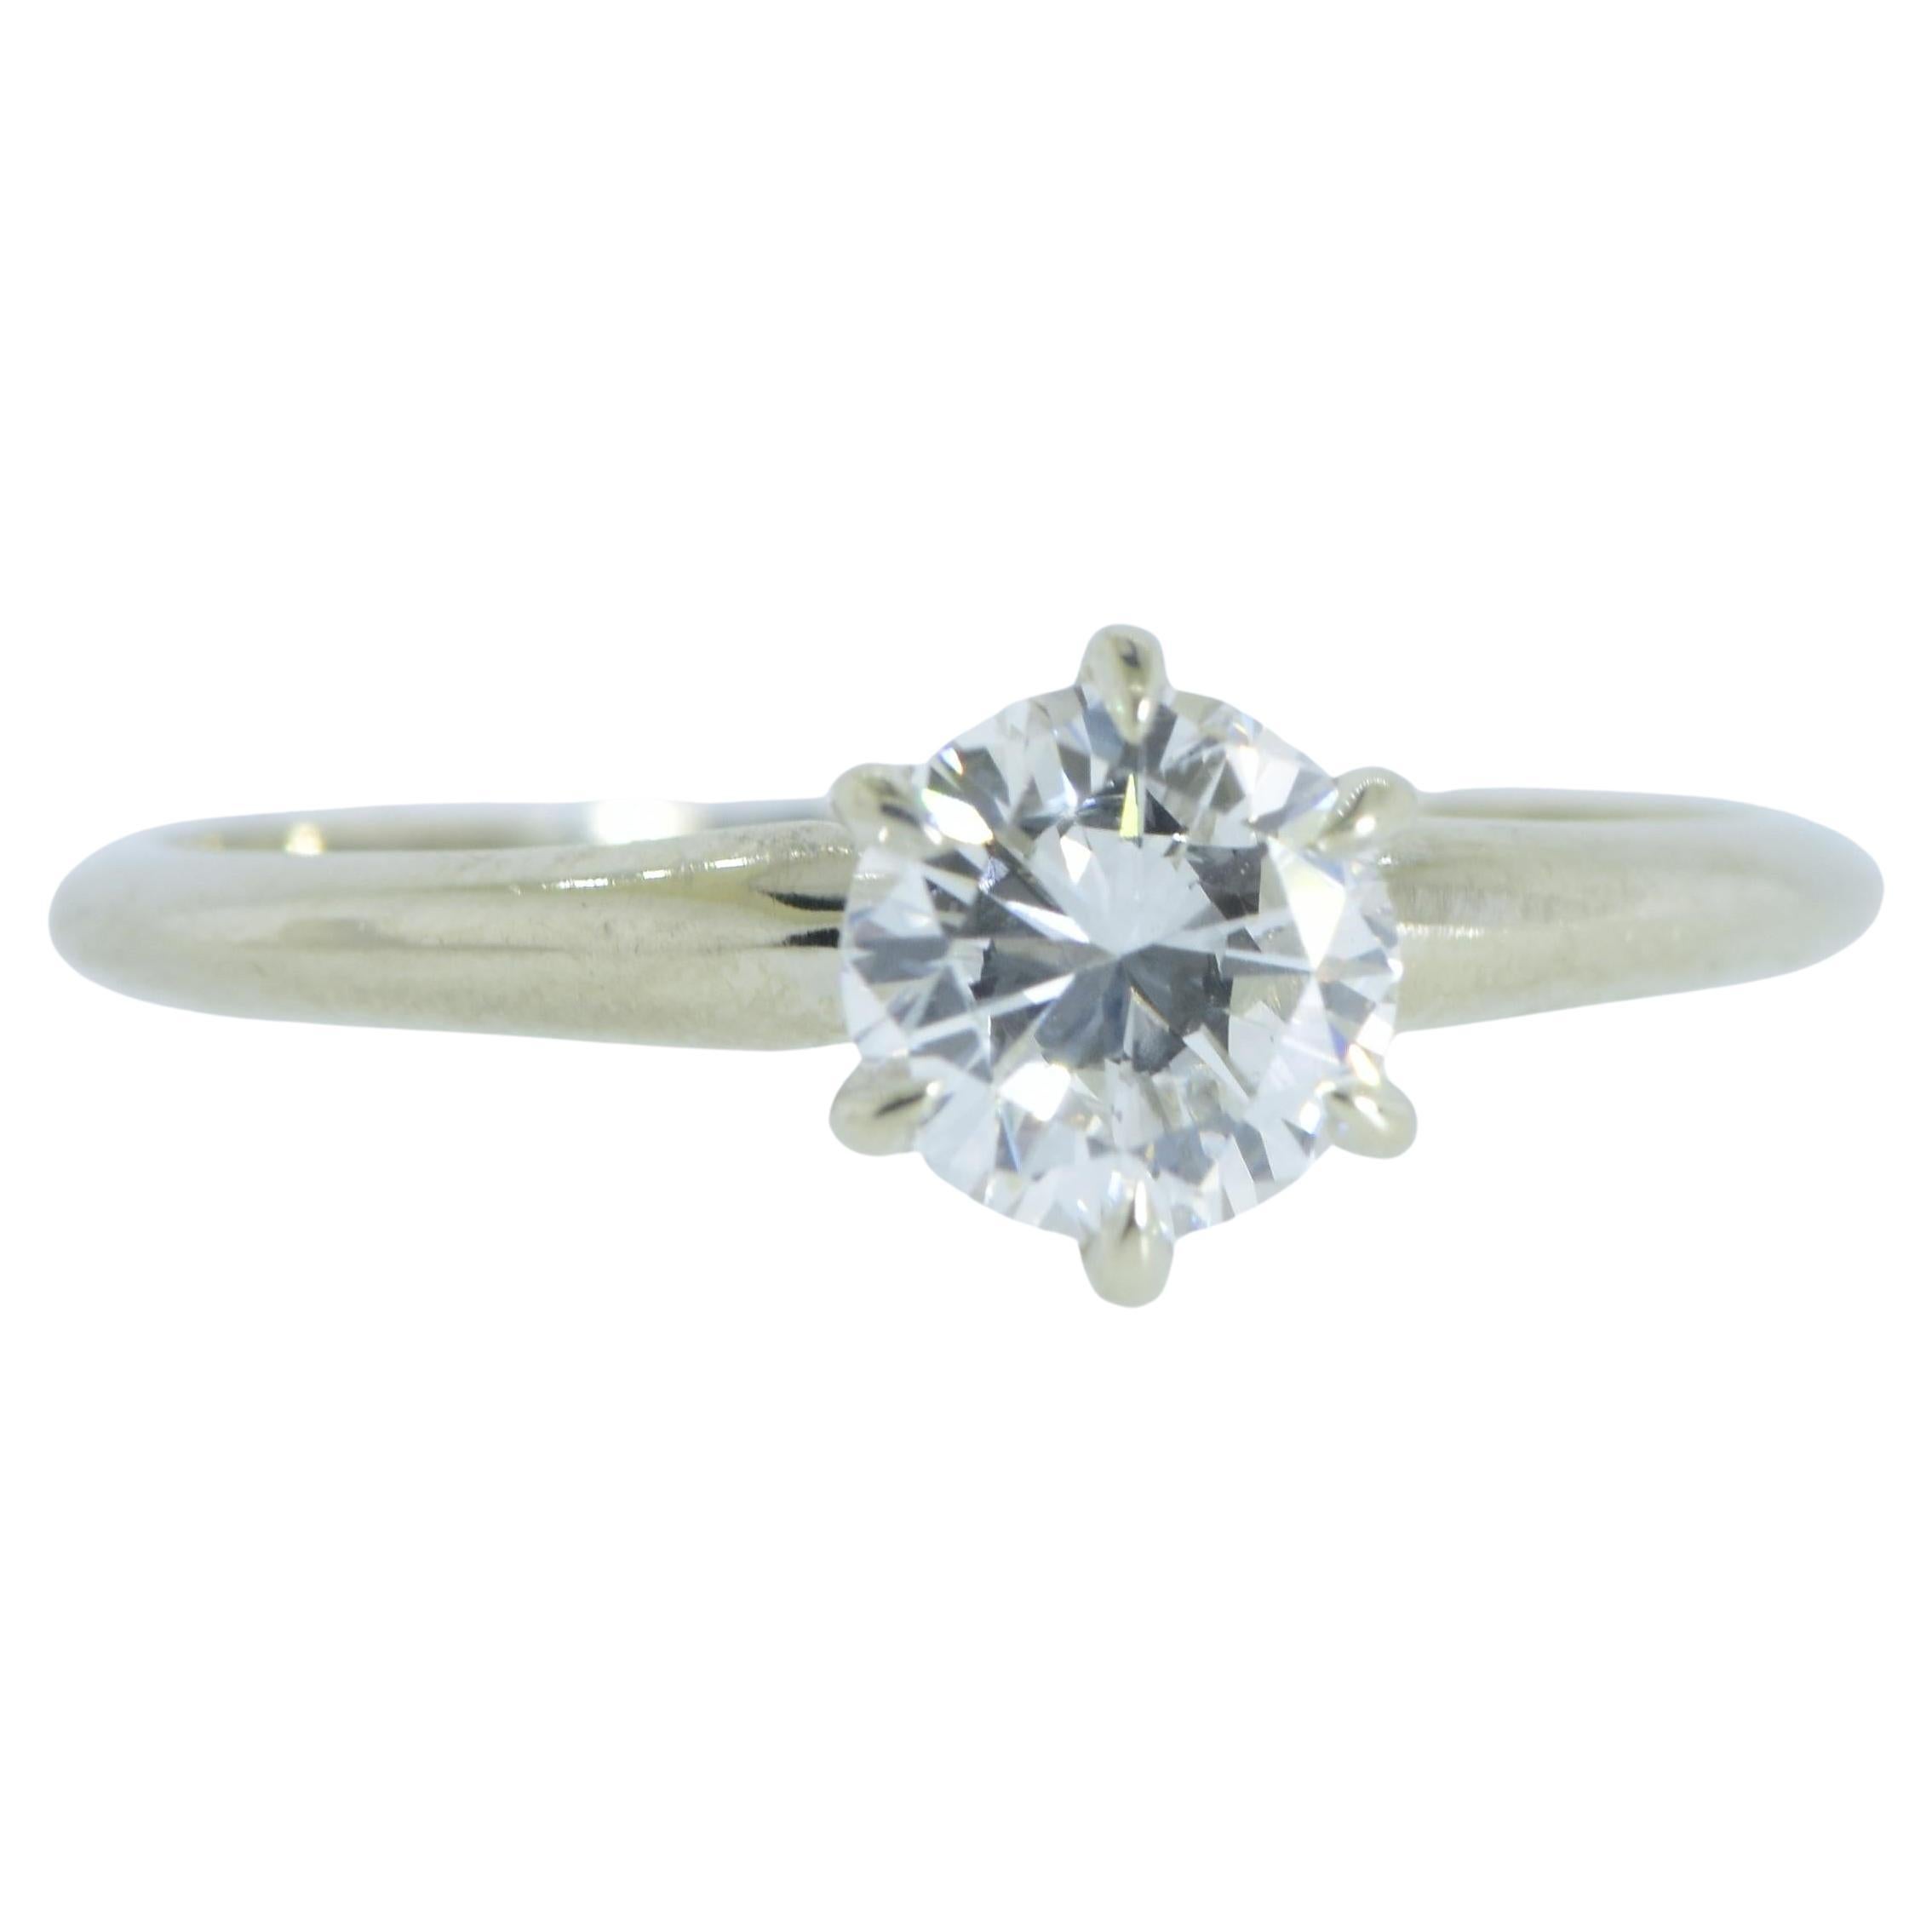 GIA Certified Diamond, E, Colorless in a Fine Contemporary Ring In New Condition For Sale In Aspen, CO